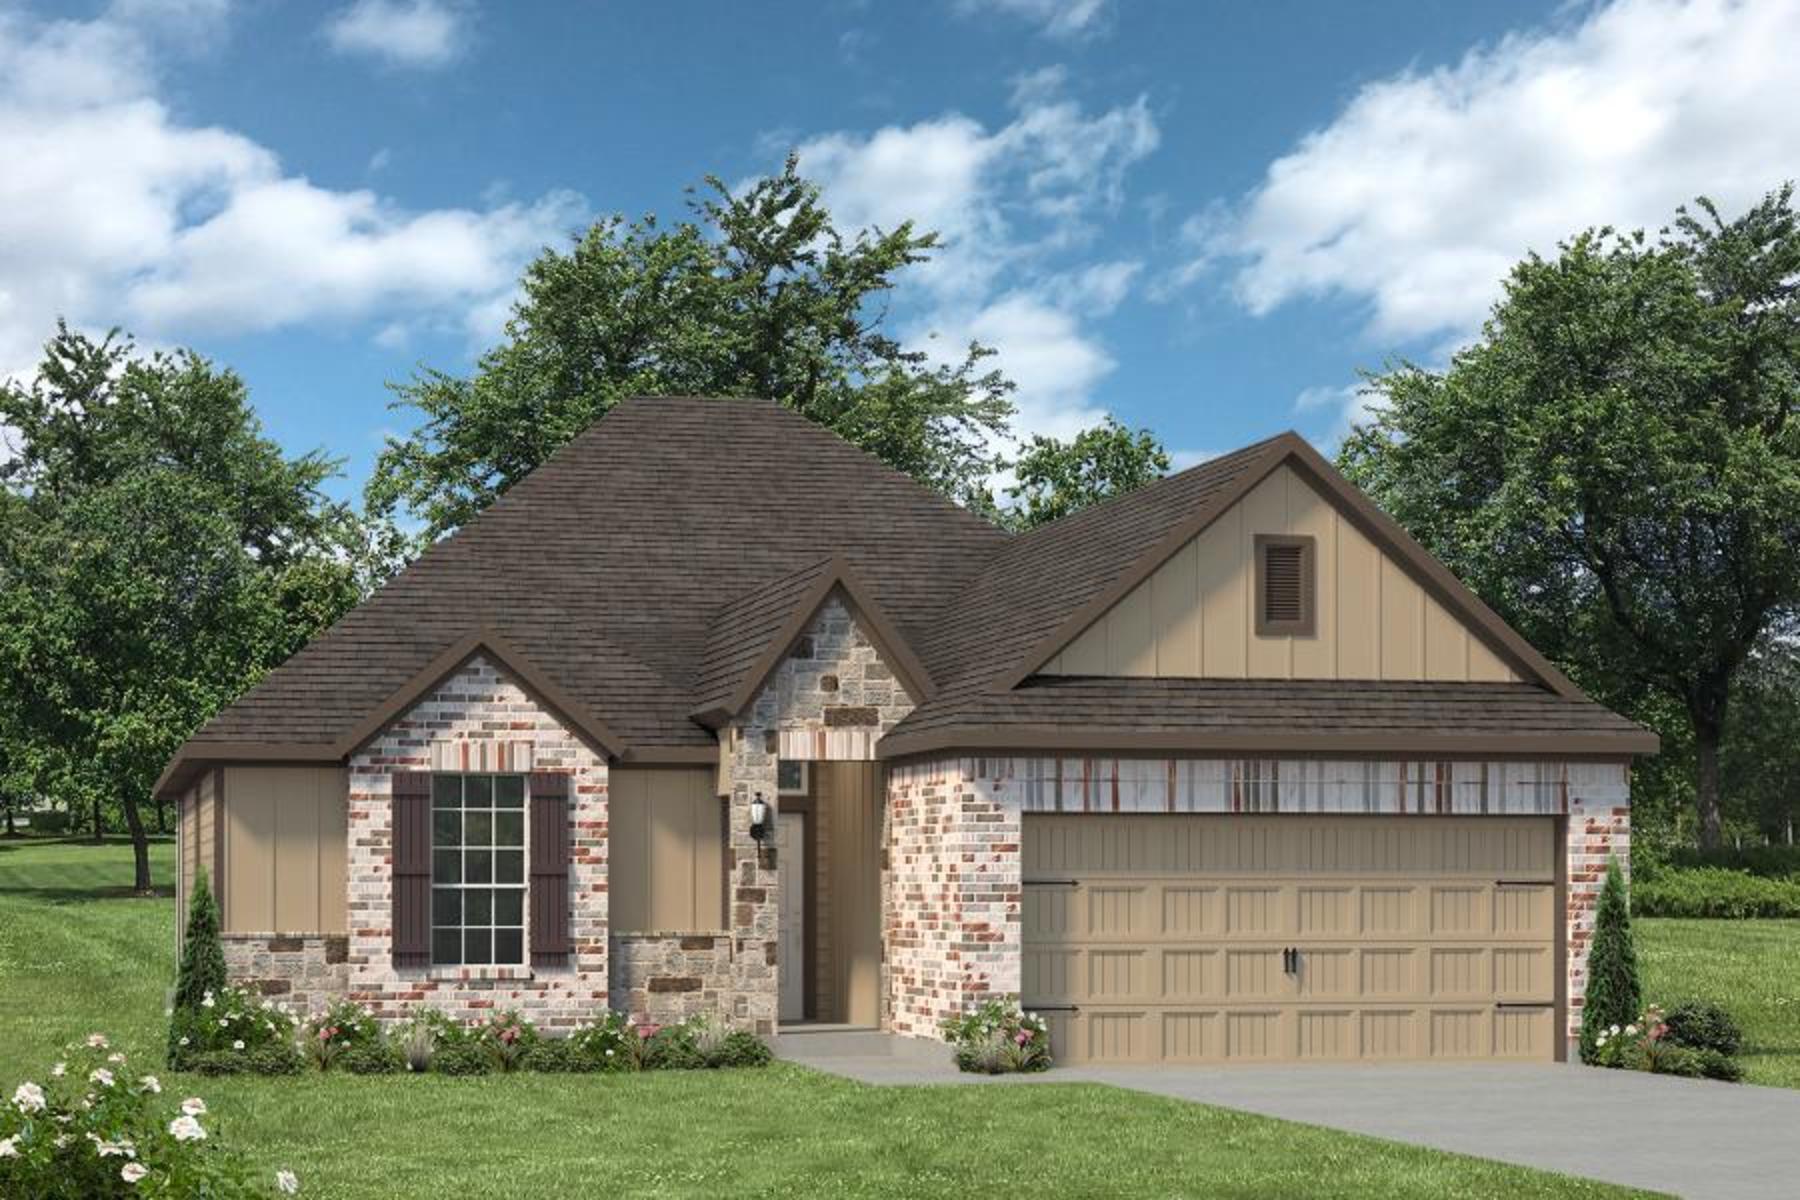 https://myhome.anewgo.com/client/stylecraft/community/Our%20Plans/plan/1651%20%7C%20Denton%20Classic?elevId=26. The 1651 New Home in Temple, TX